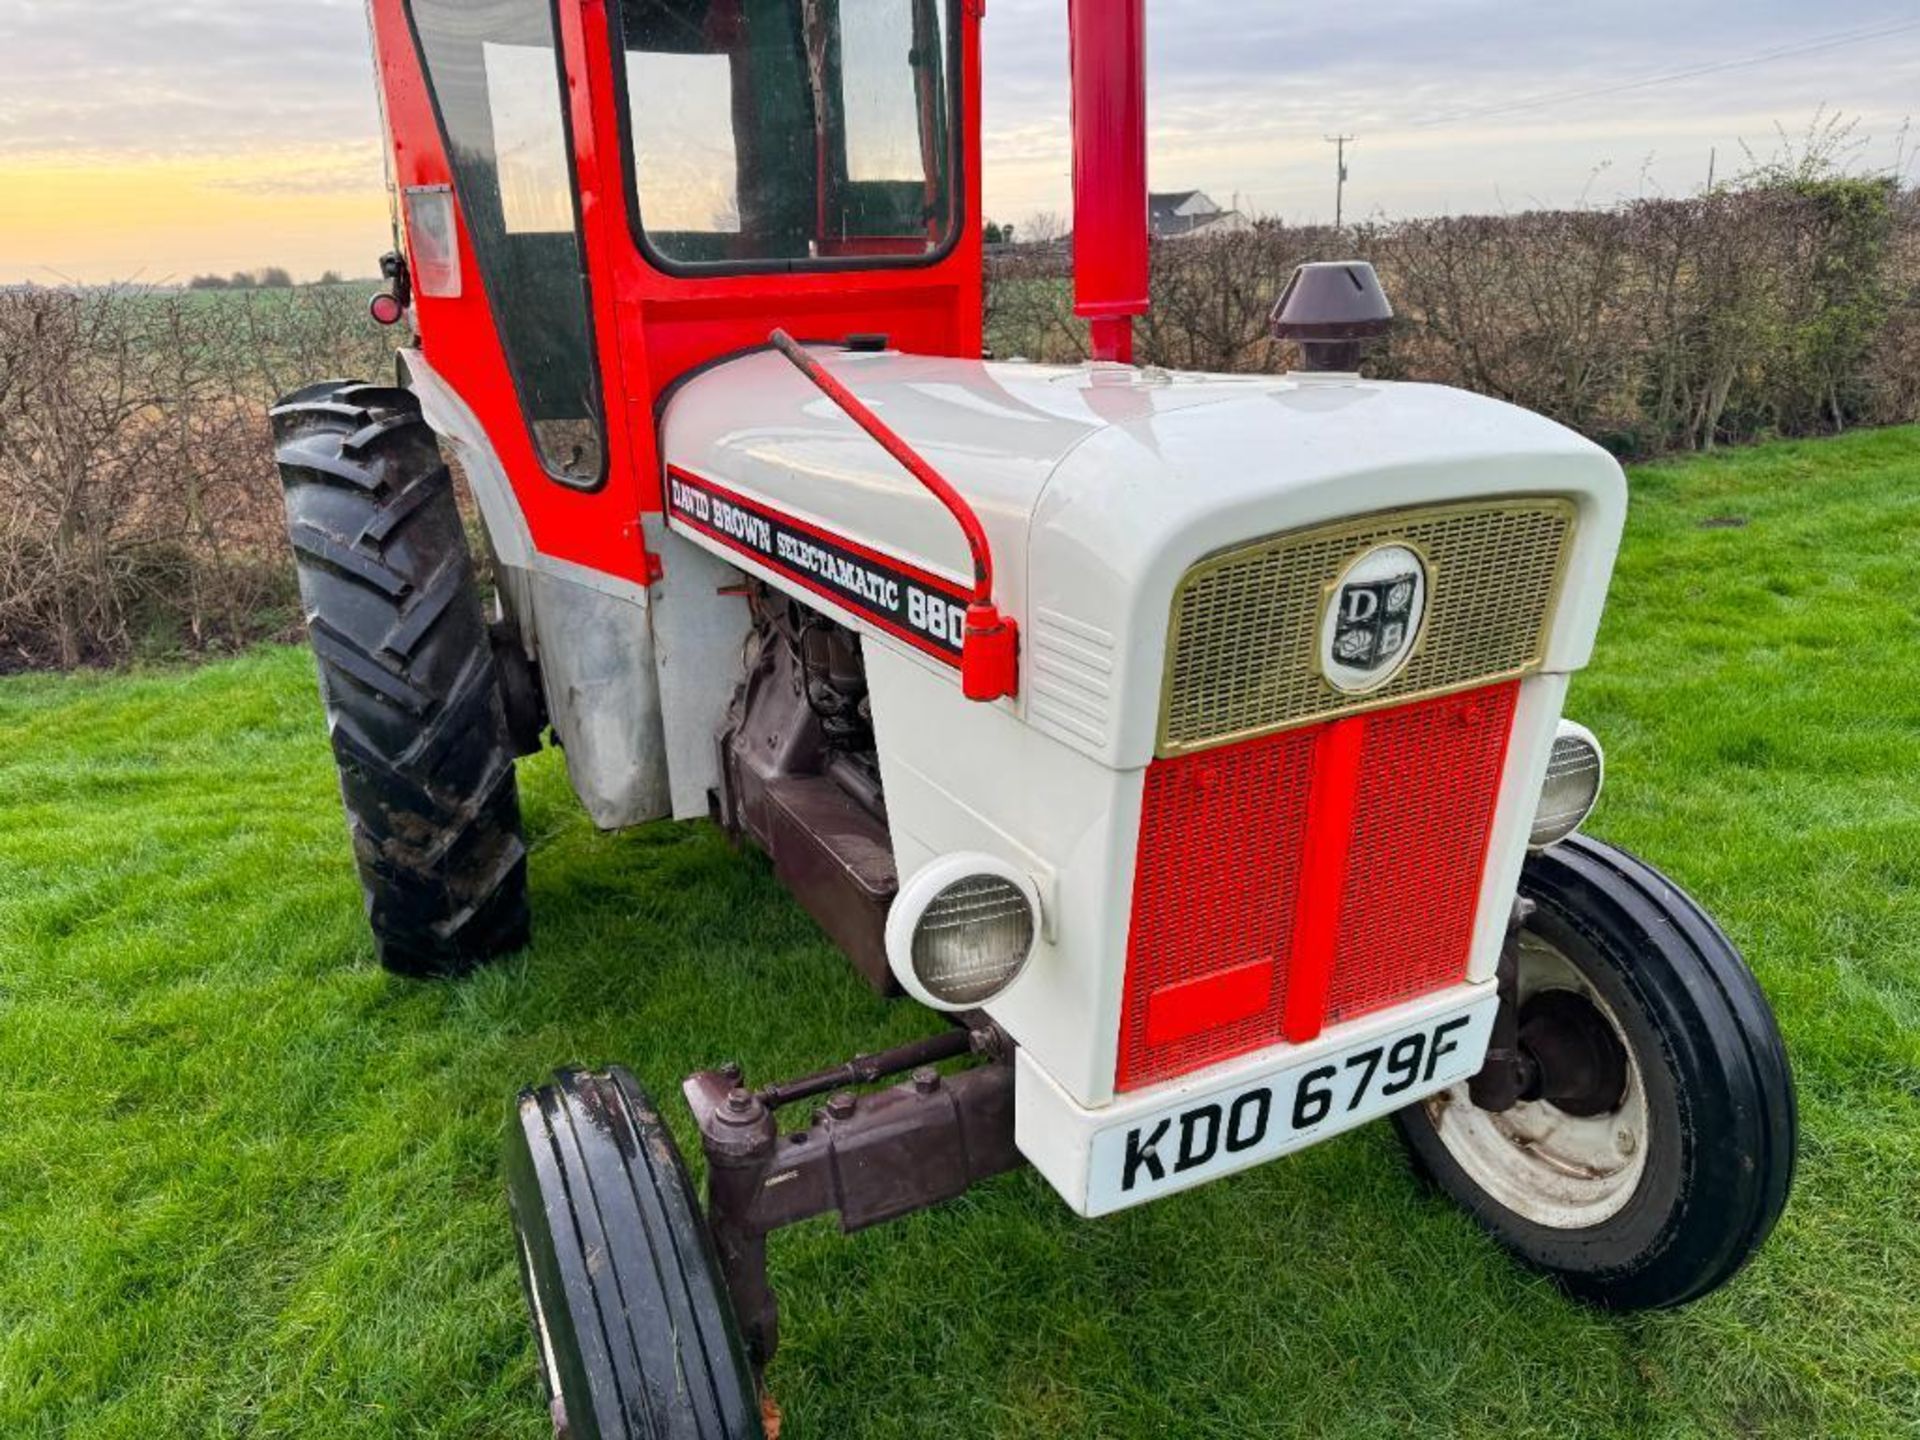 1968 David Brown 880 Selectamatic 2wd diesel tractor with canvas cab, rear hydraulic valve, PTO, rea - Image 14 of 19